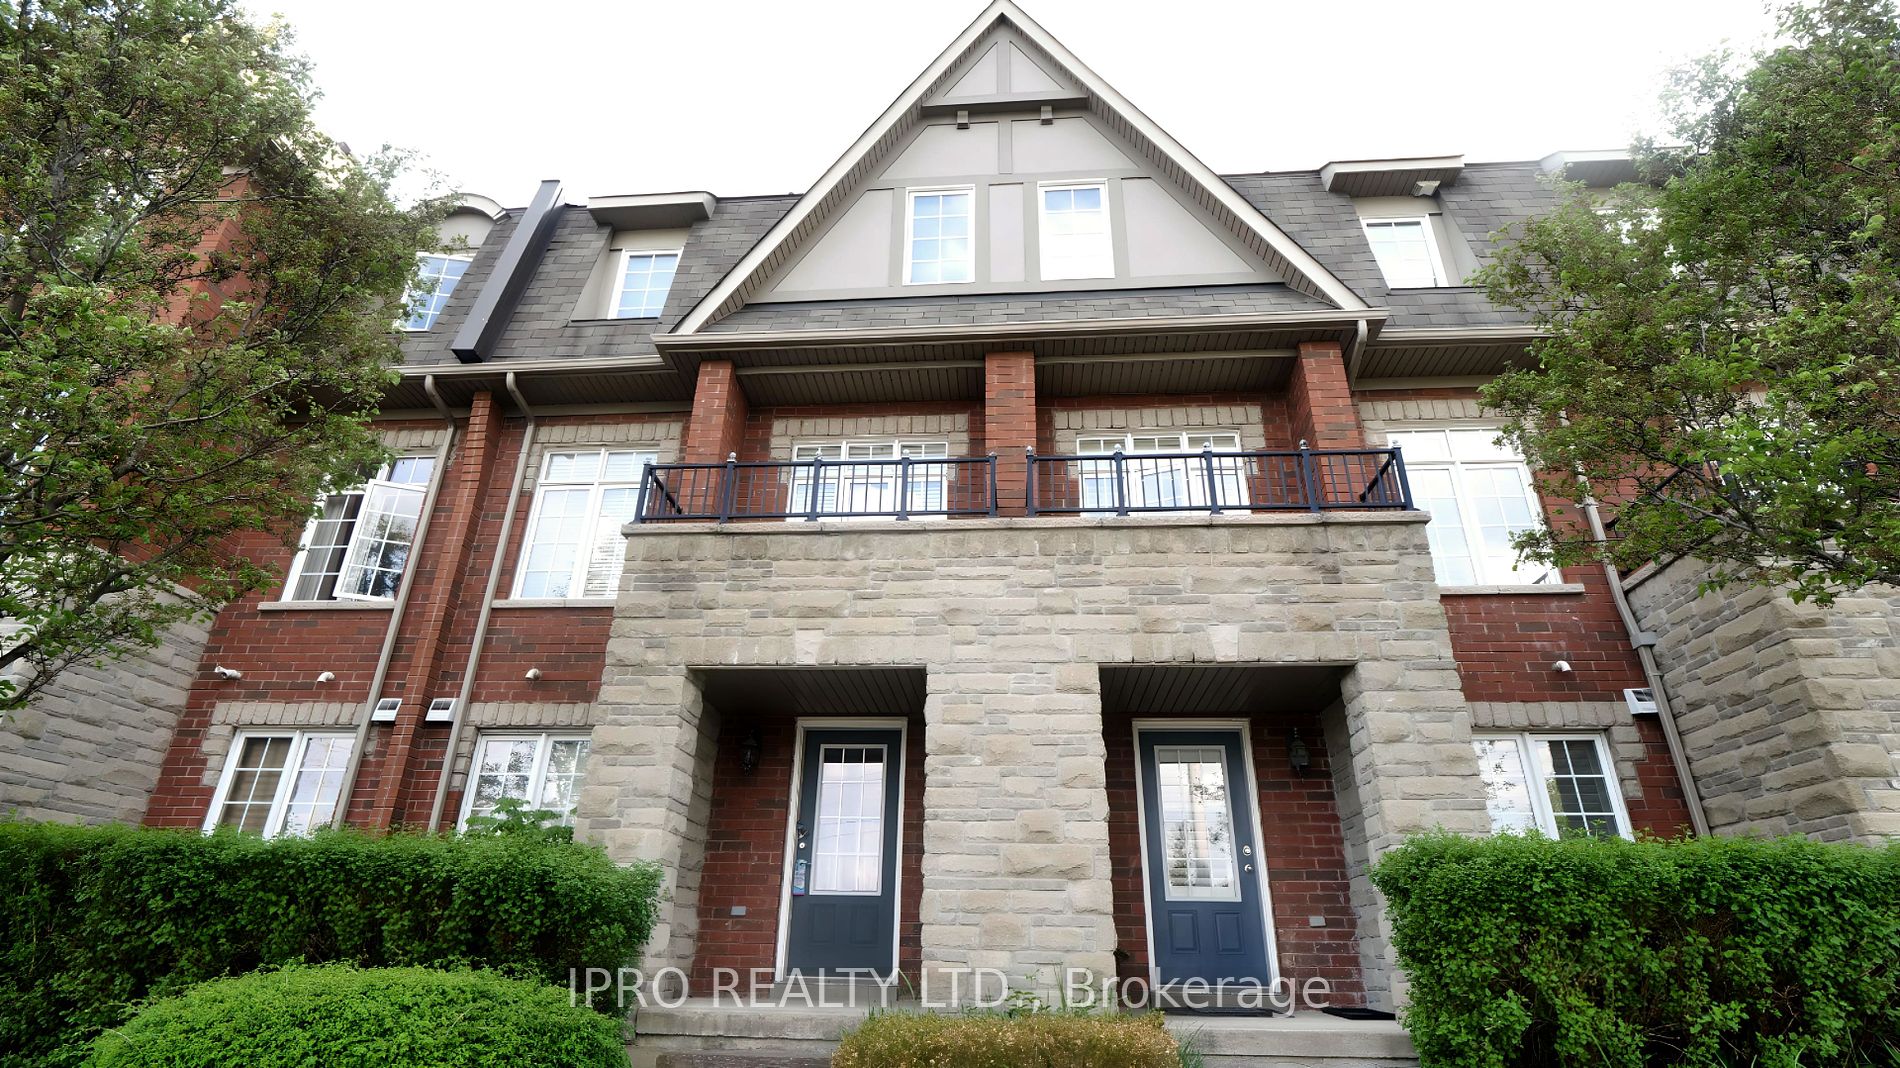 Condo Townhouse house for sale at 1701 Finch Ave Pickering Ontario